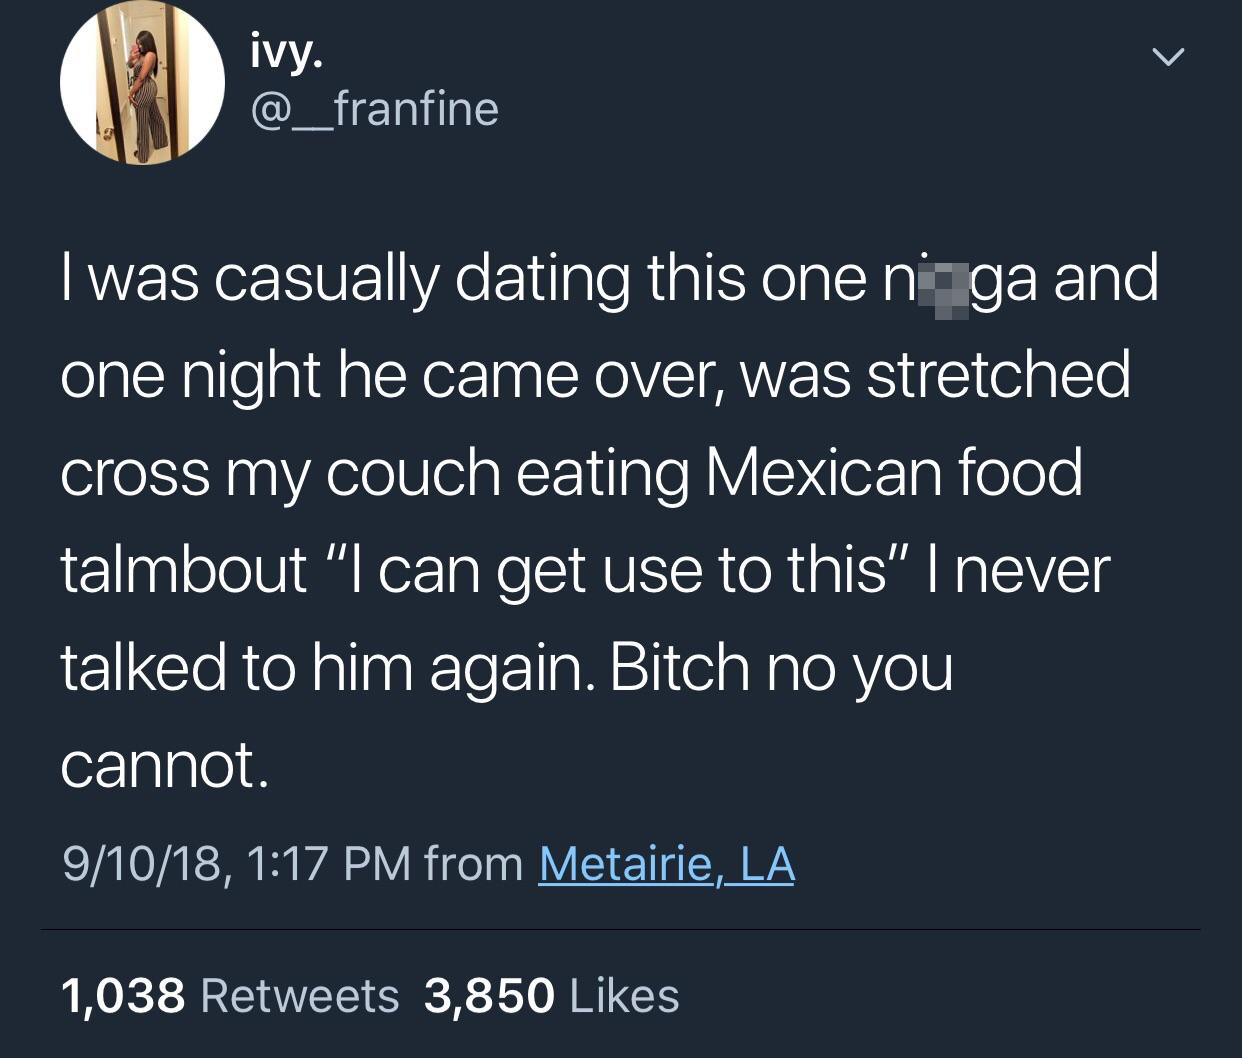 memes - atmosphere - ivy. I was casually dating this one ni ga and one night he came over, was stretched cross my couch eating Mexican food talmbout "I can get use to this" I never talked to him again. Bitch no you cannot. 91018, from Metairie, La 1,038 3